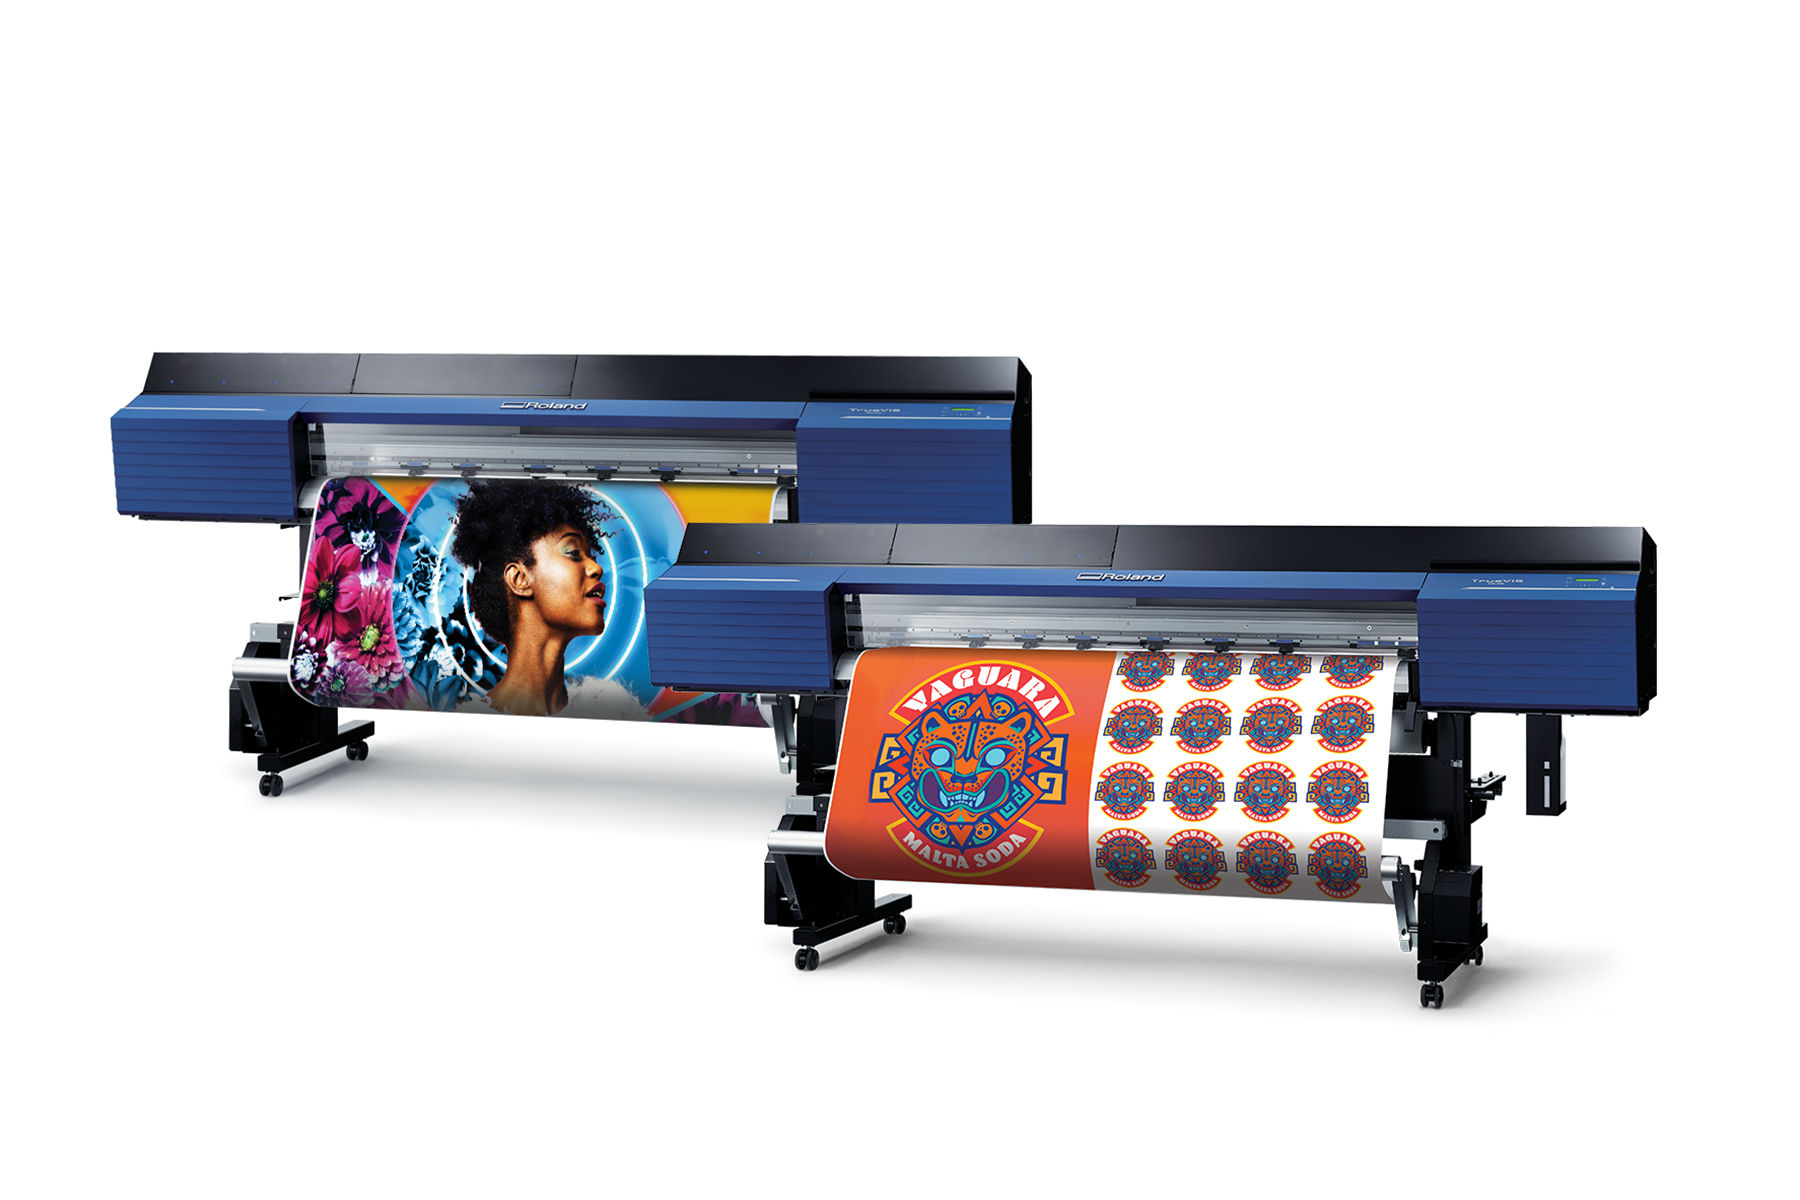 Image of Roland DGA's new TrueVIS VG series wide-format printer/cutters.